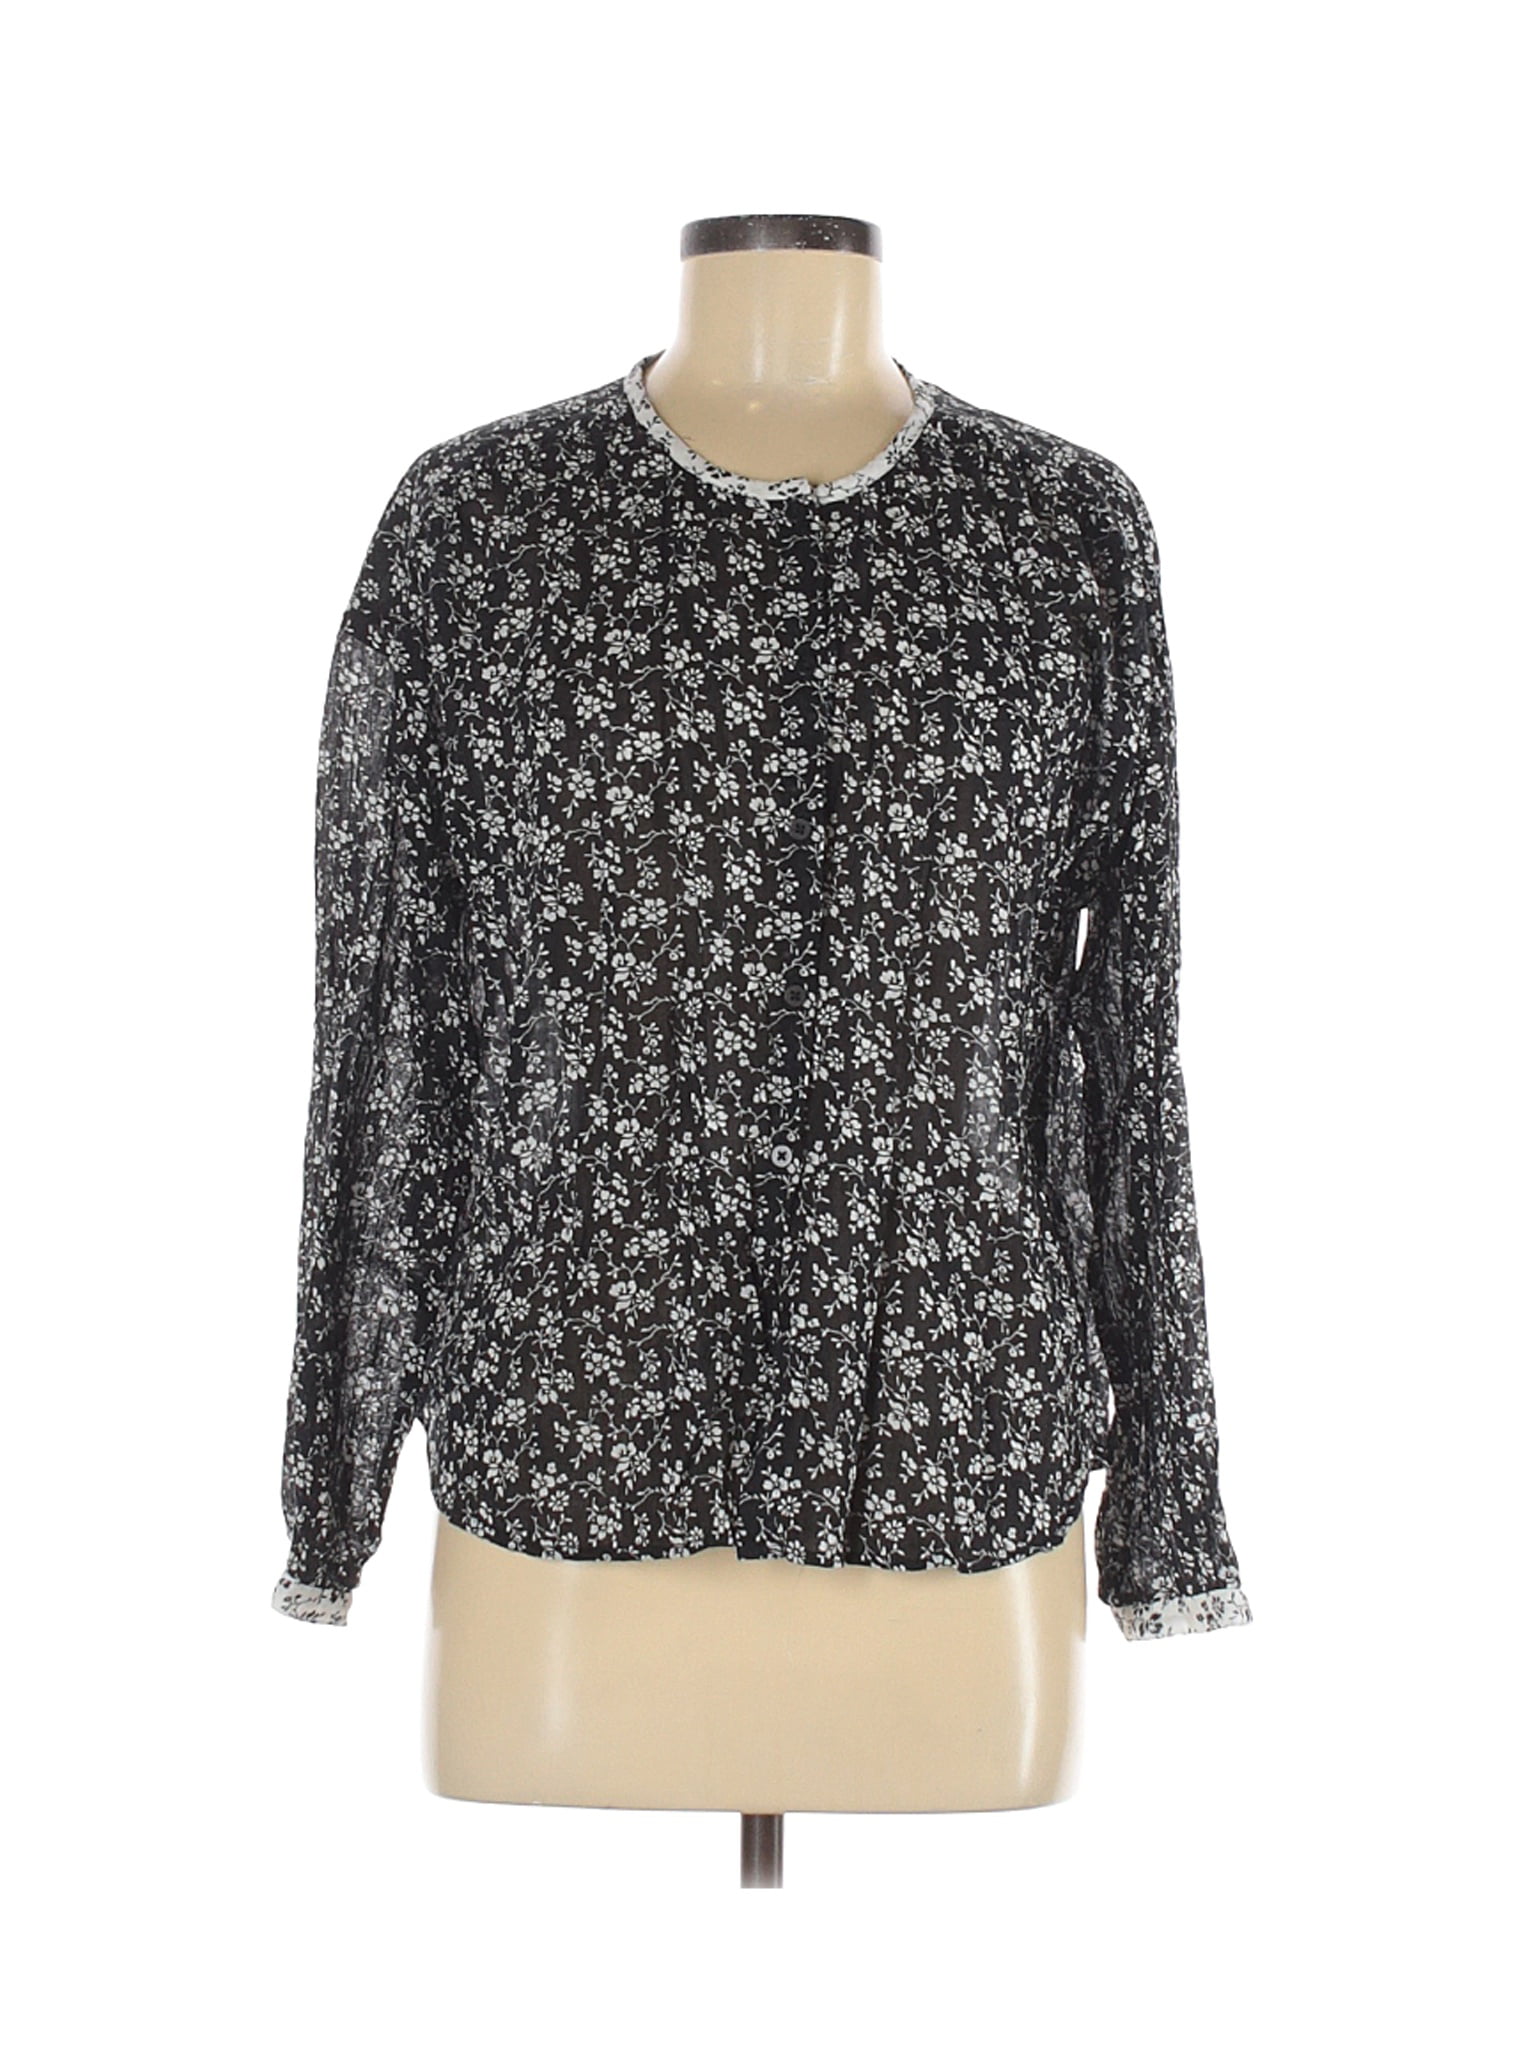 Madewell - Pre-Owned Madewell Women's Size M Long Sleeve Blouse ...